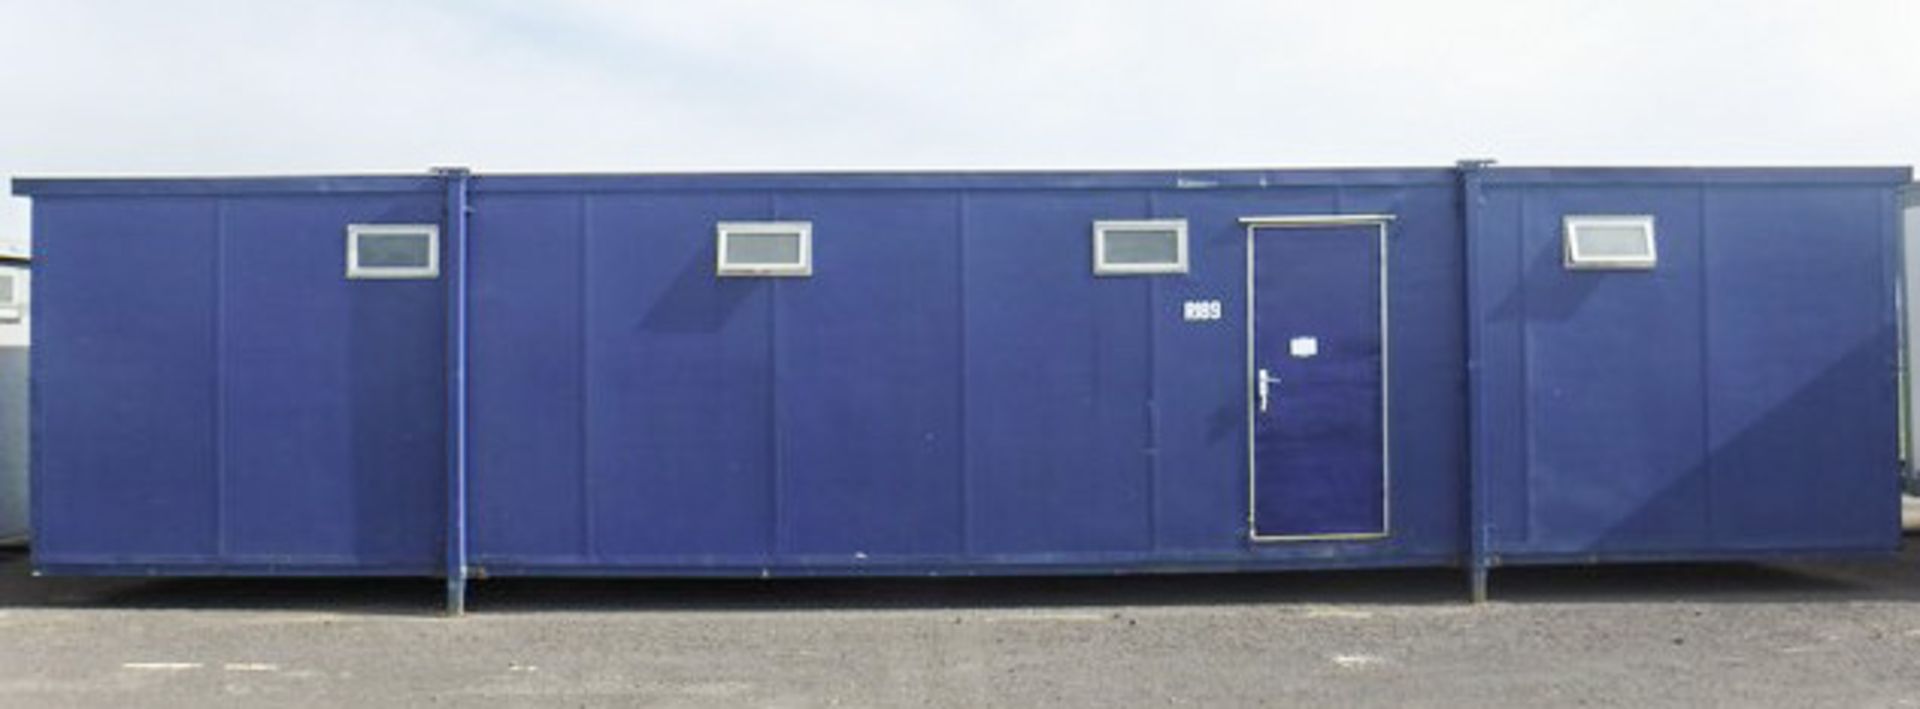 40 X 10 TOILET BLOCK, C/W 10 CUBICALS, 10 URINALS, 9 SINKS, WATER HEATERS TEMP CONTROLLED ANTI-FREEZ